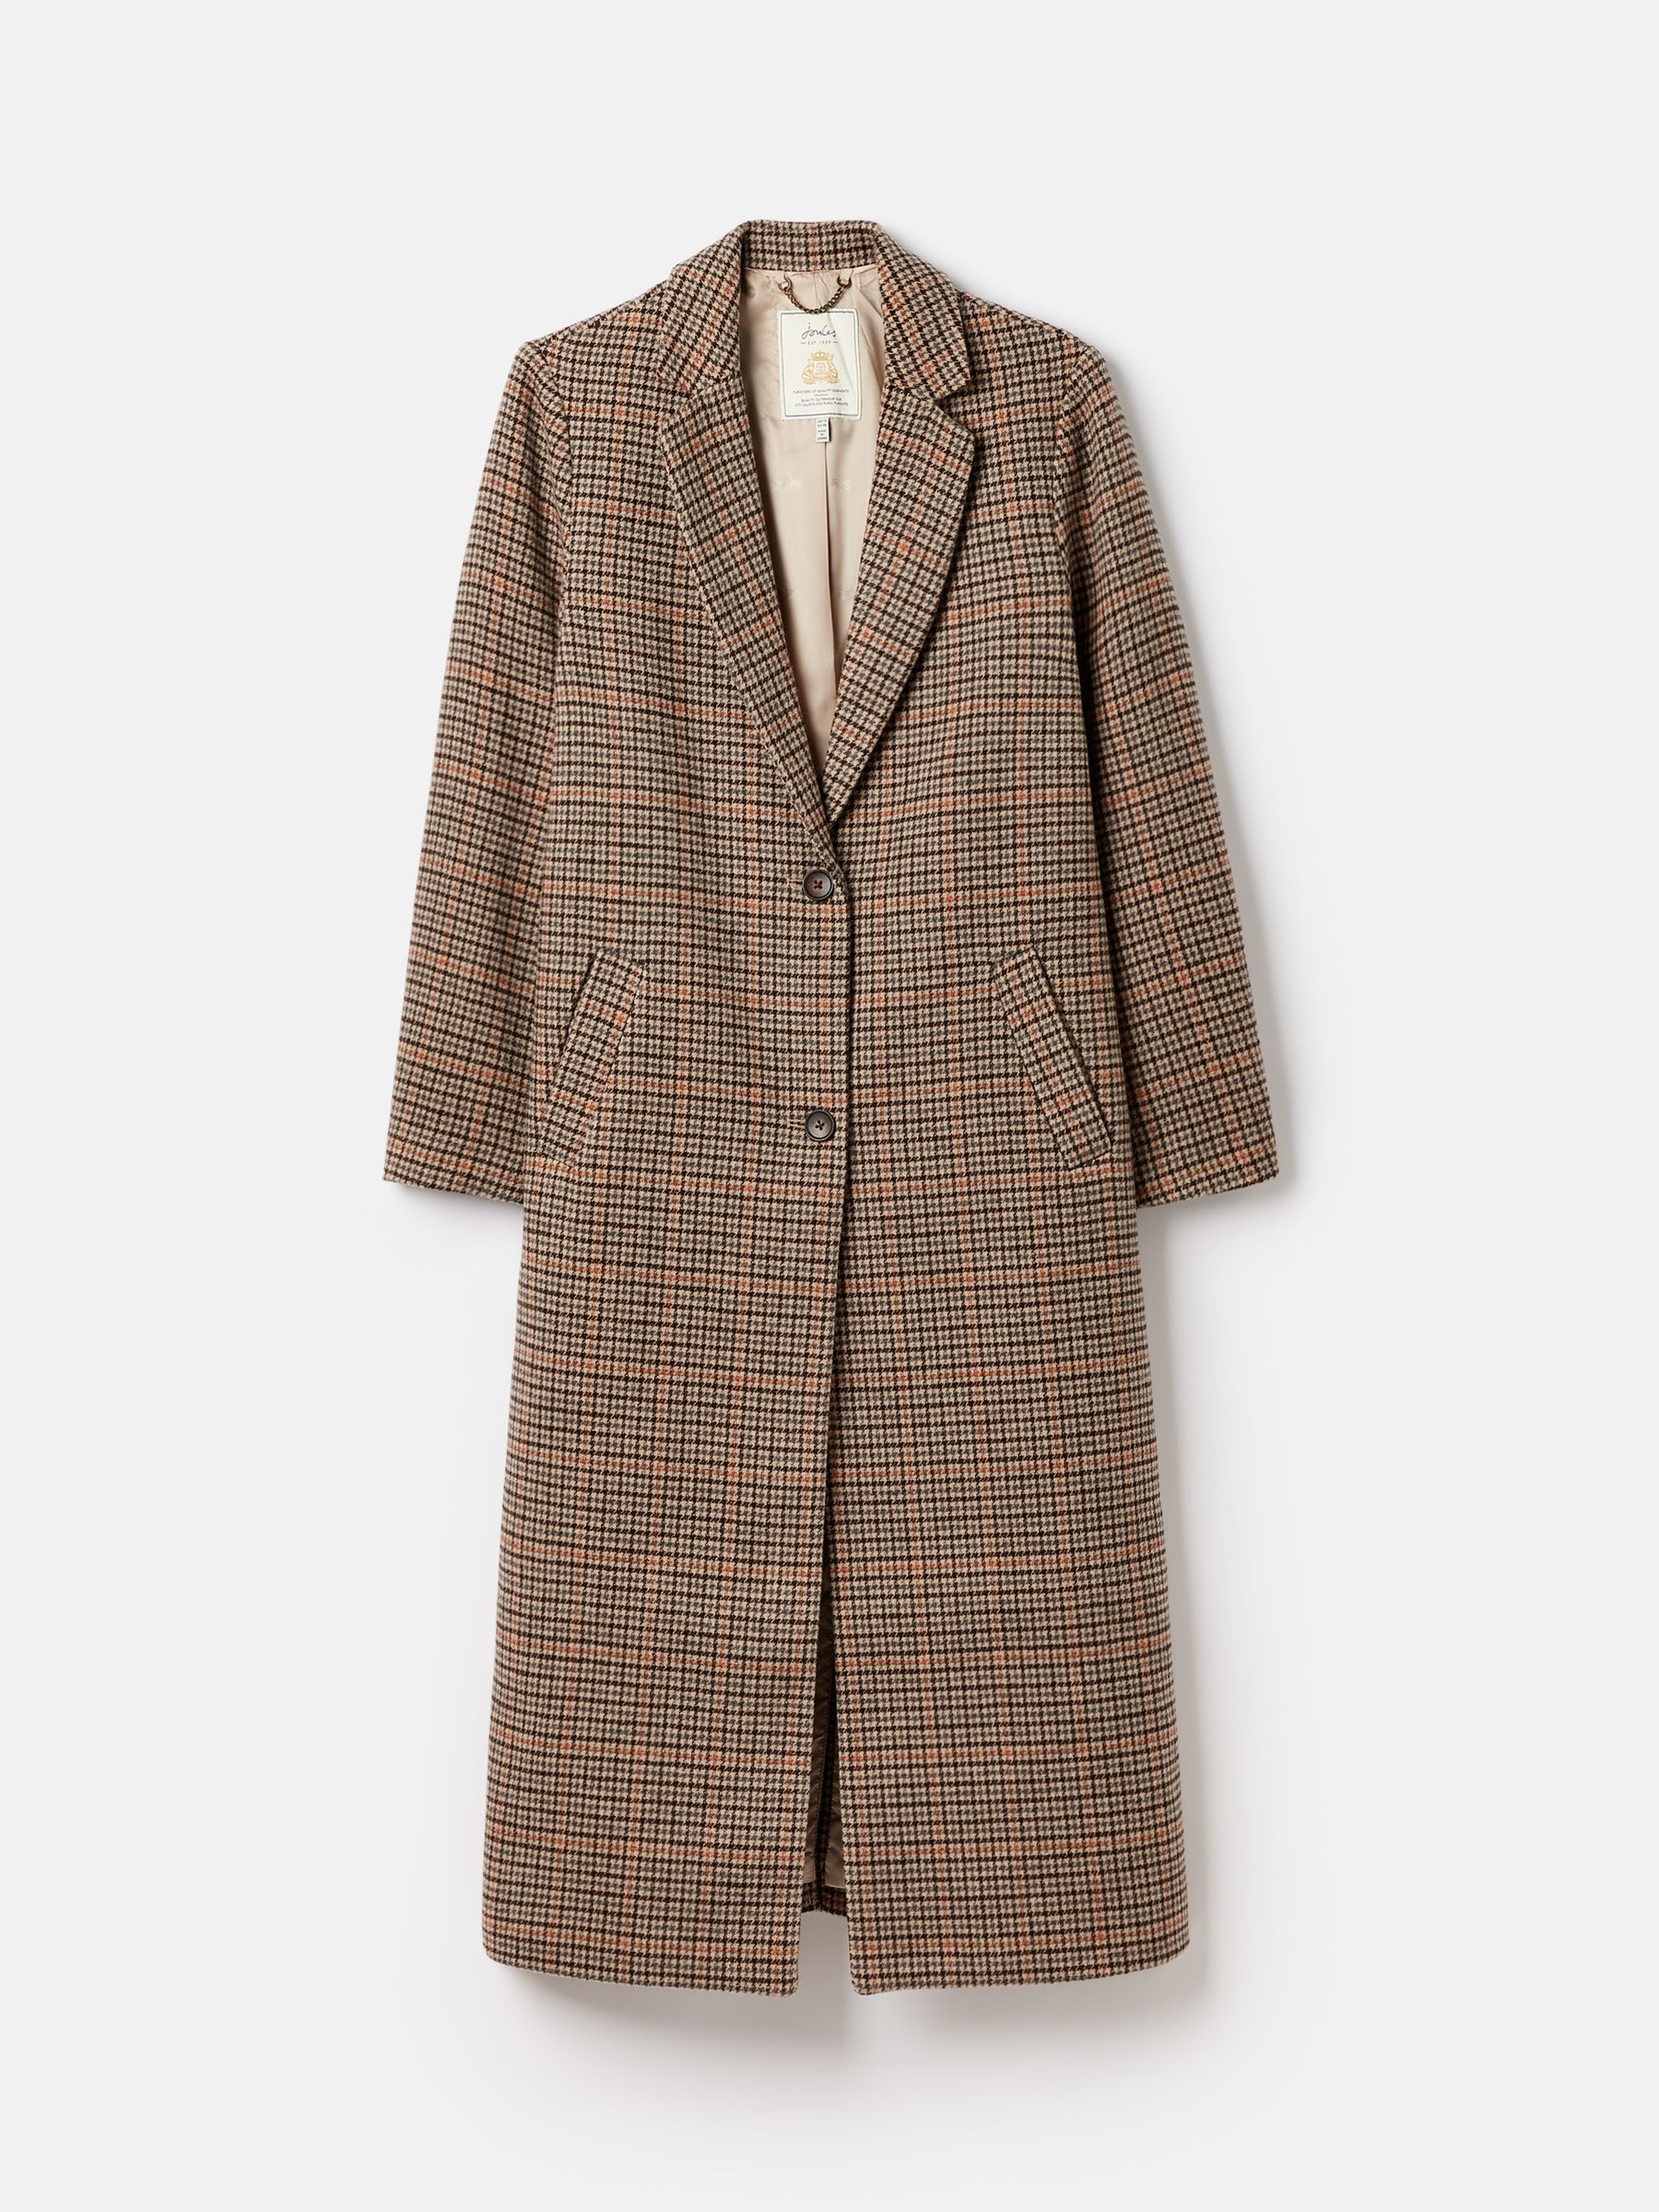 Buy Joules Harrow Wool Blend Coat from the Joules online shop